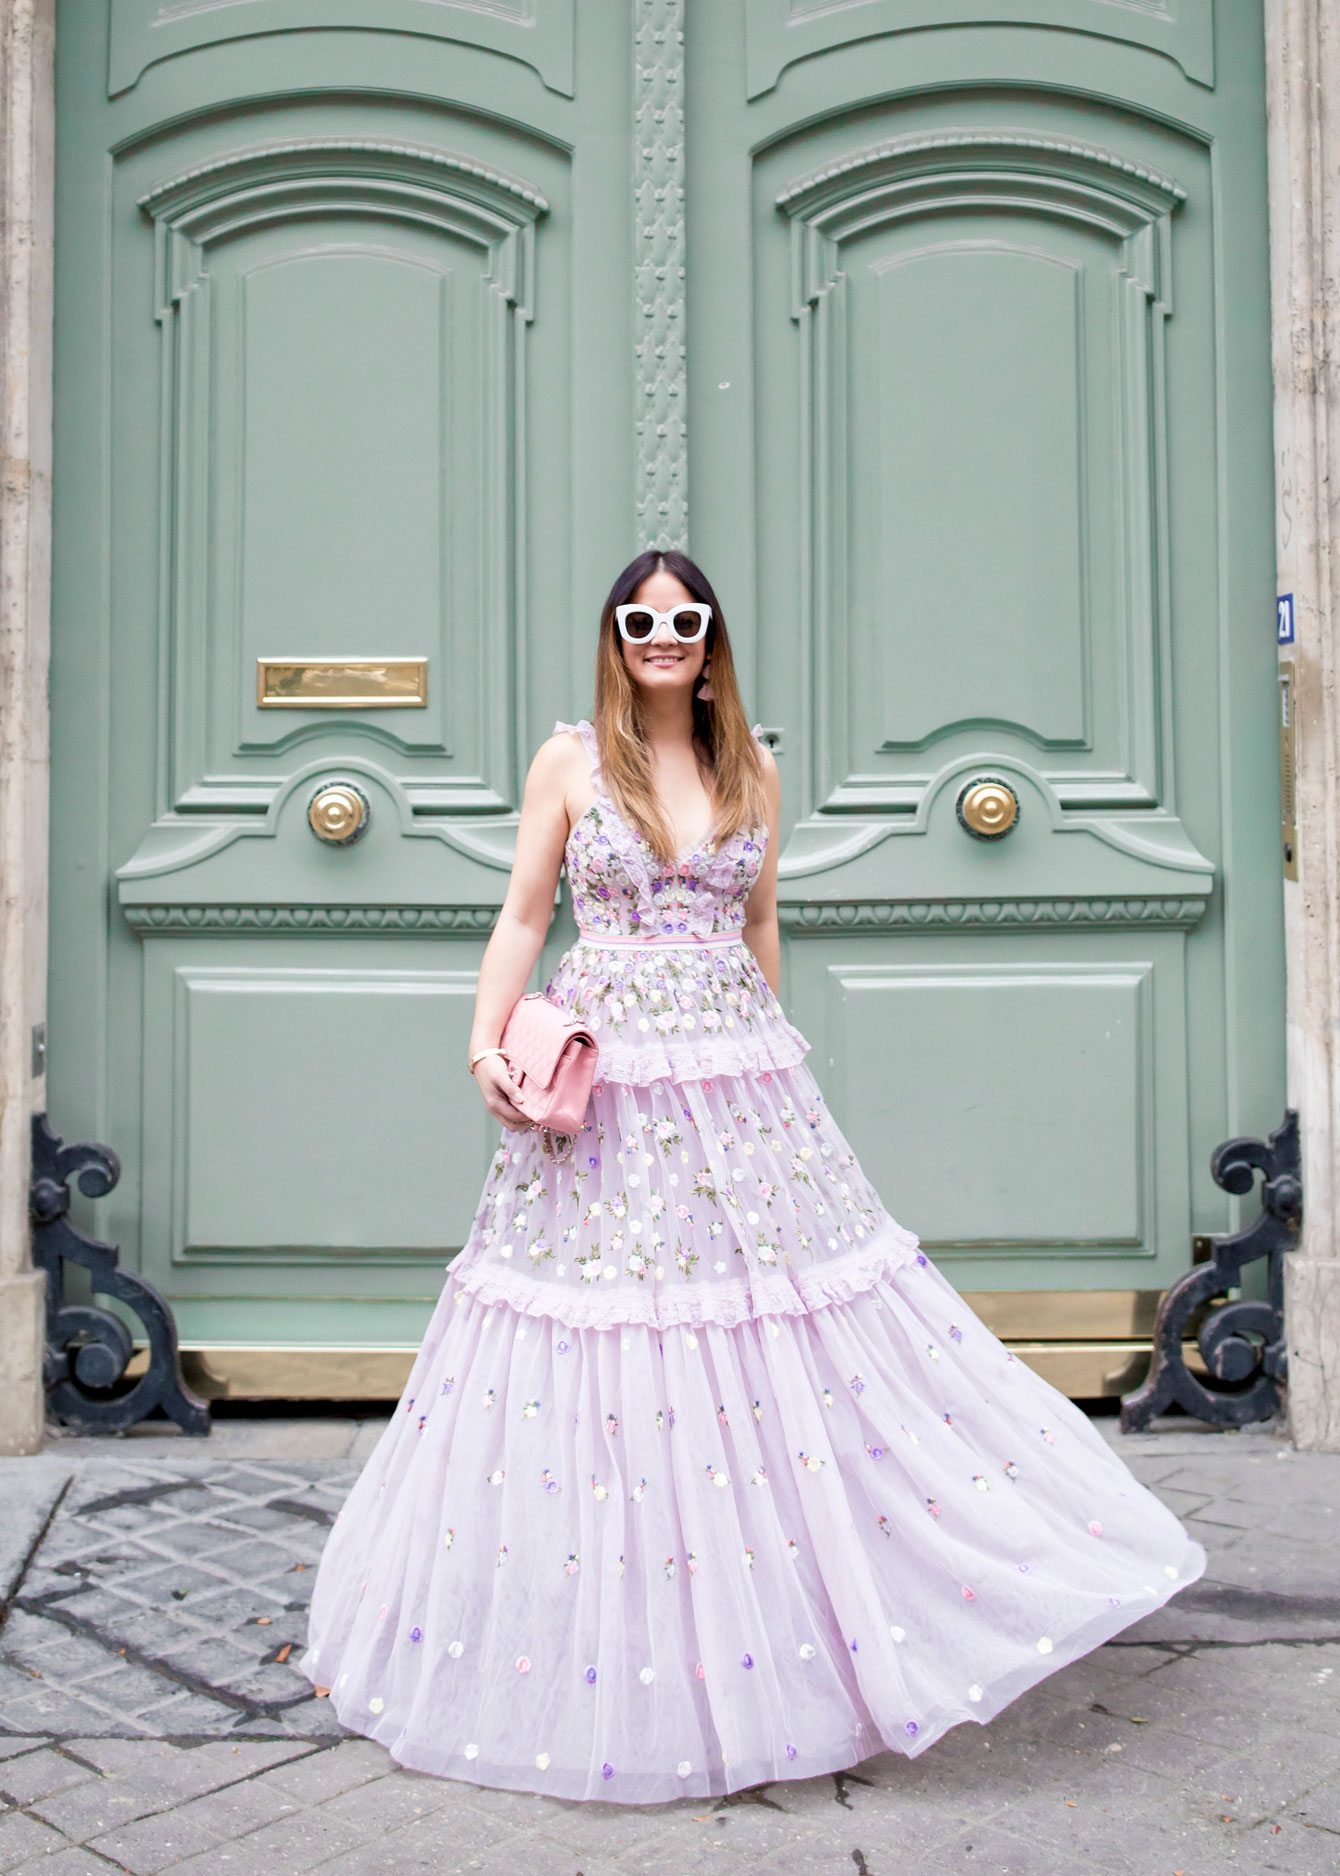 Embellished Needle and Thread Lilac Gown in Paris